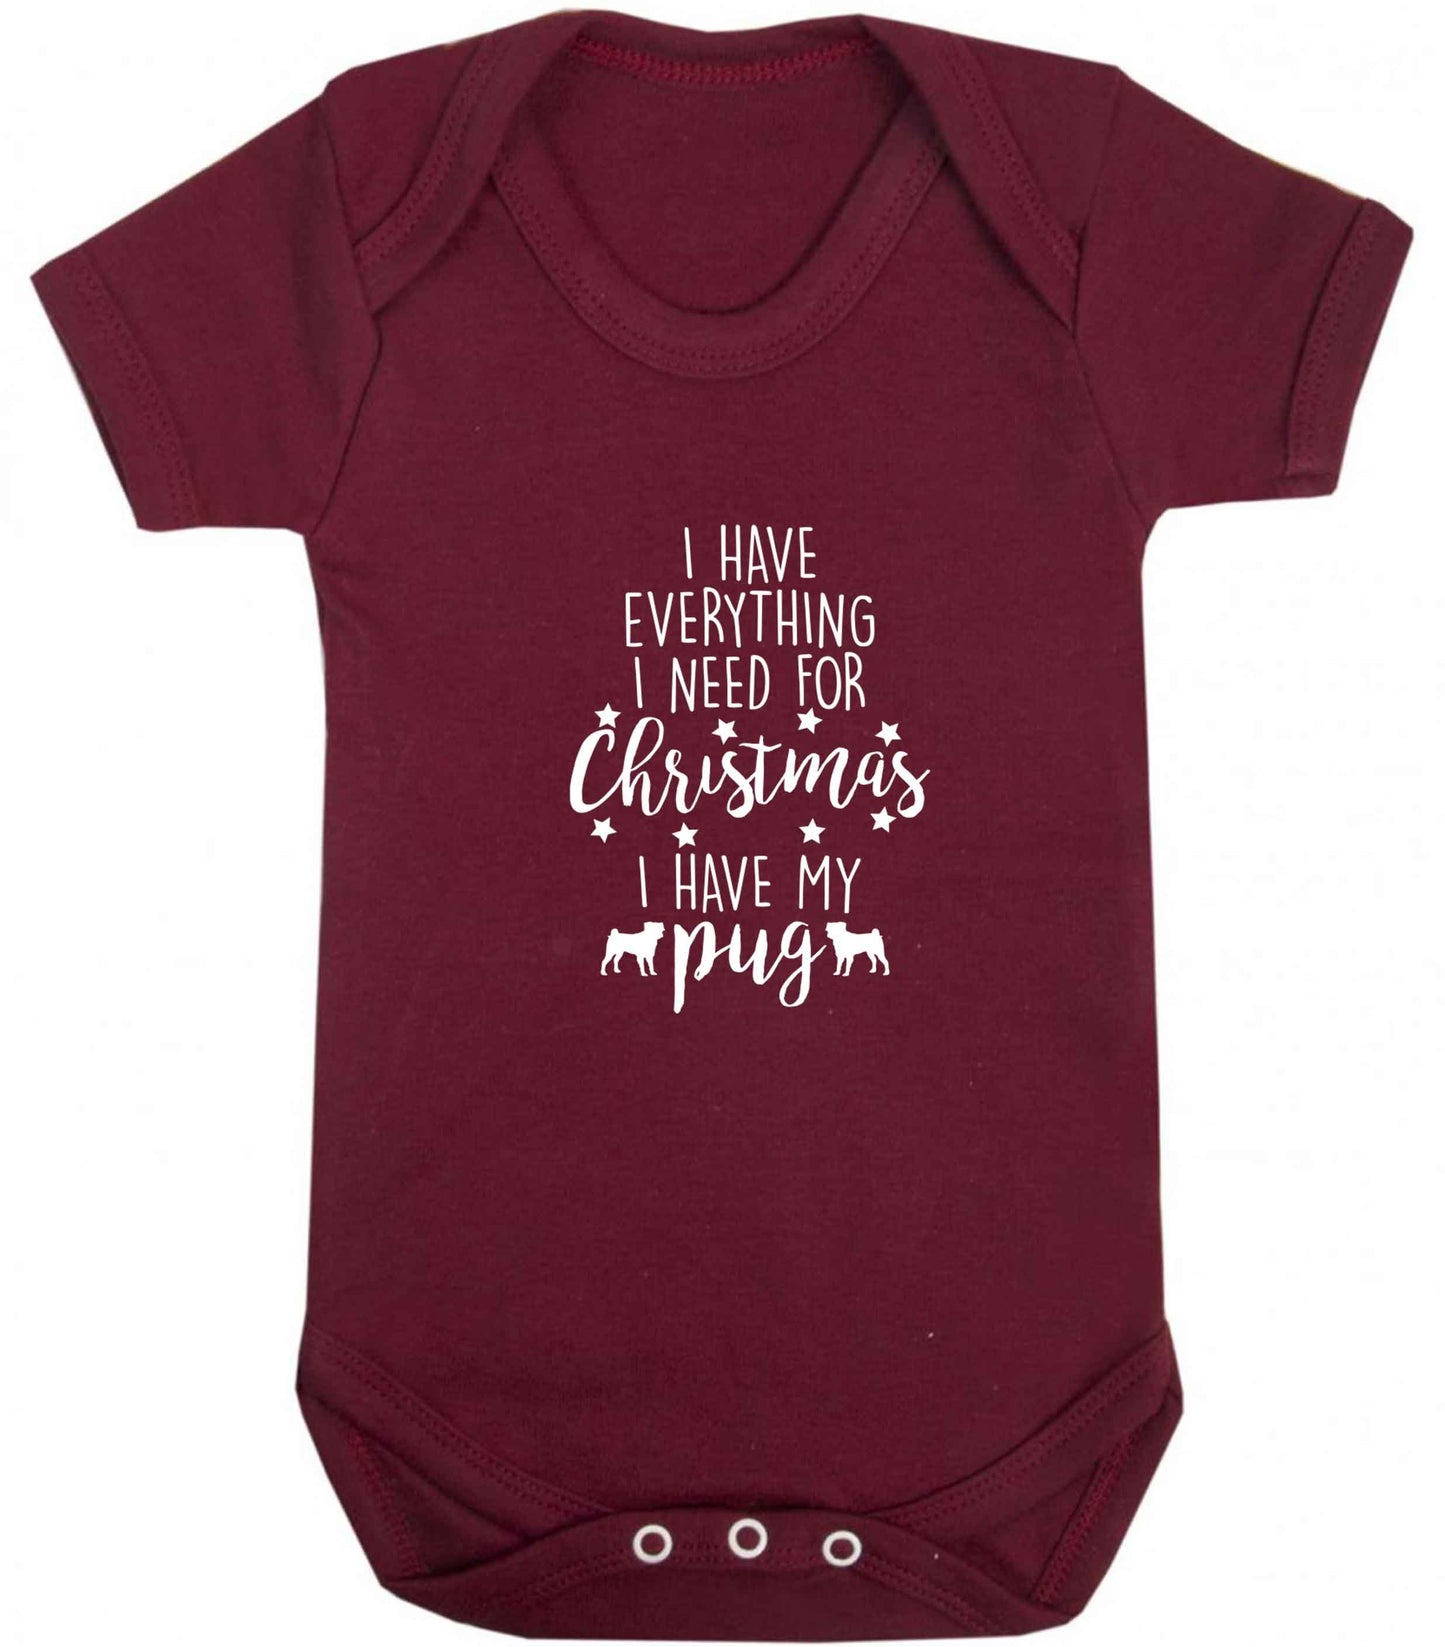 I have everything I need for Christmas I have my pug baby vest maroon 18-24 months